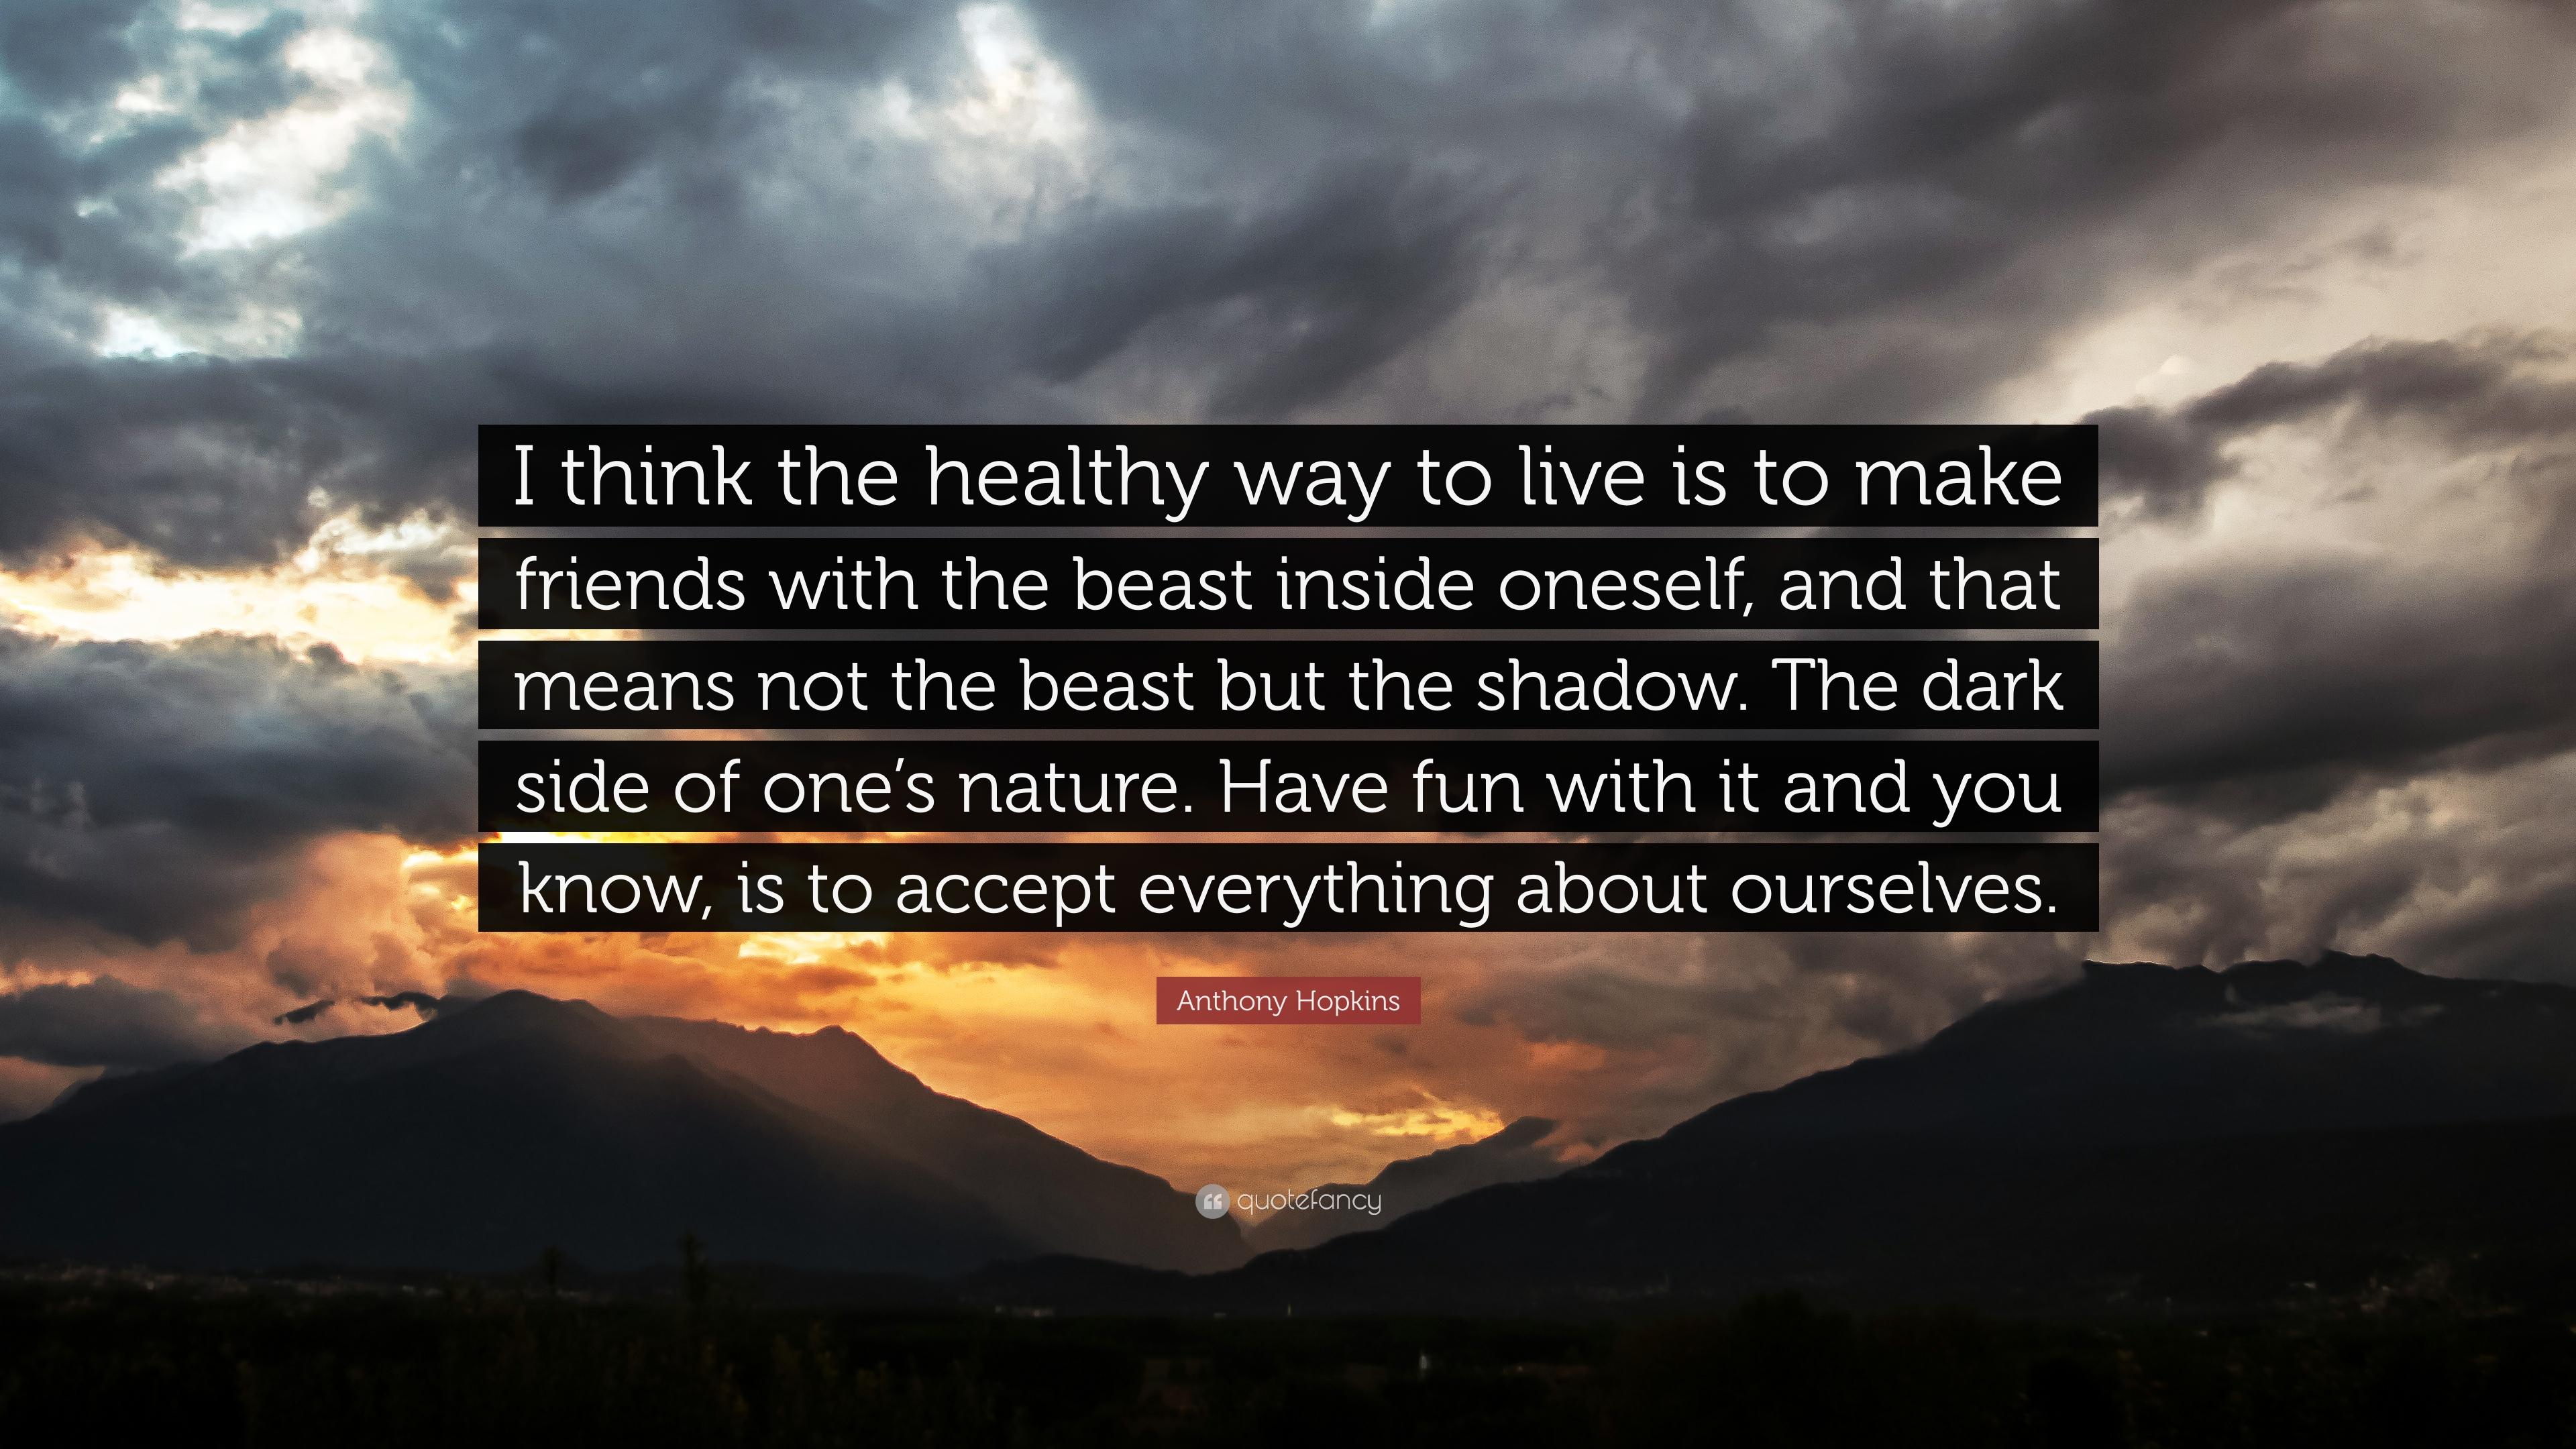 Anthony Hopkins Quote: “I think the healthy way to live is